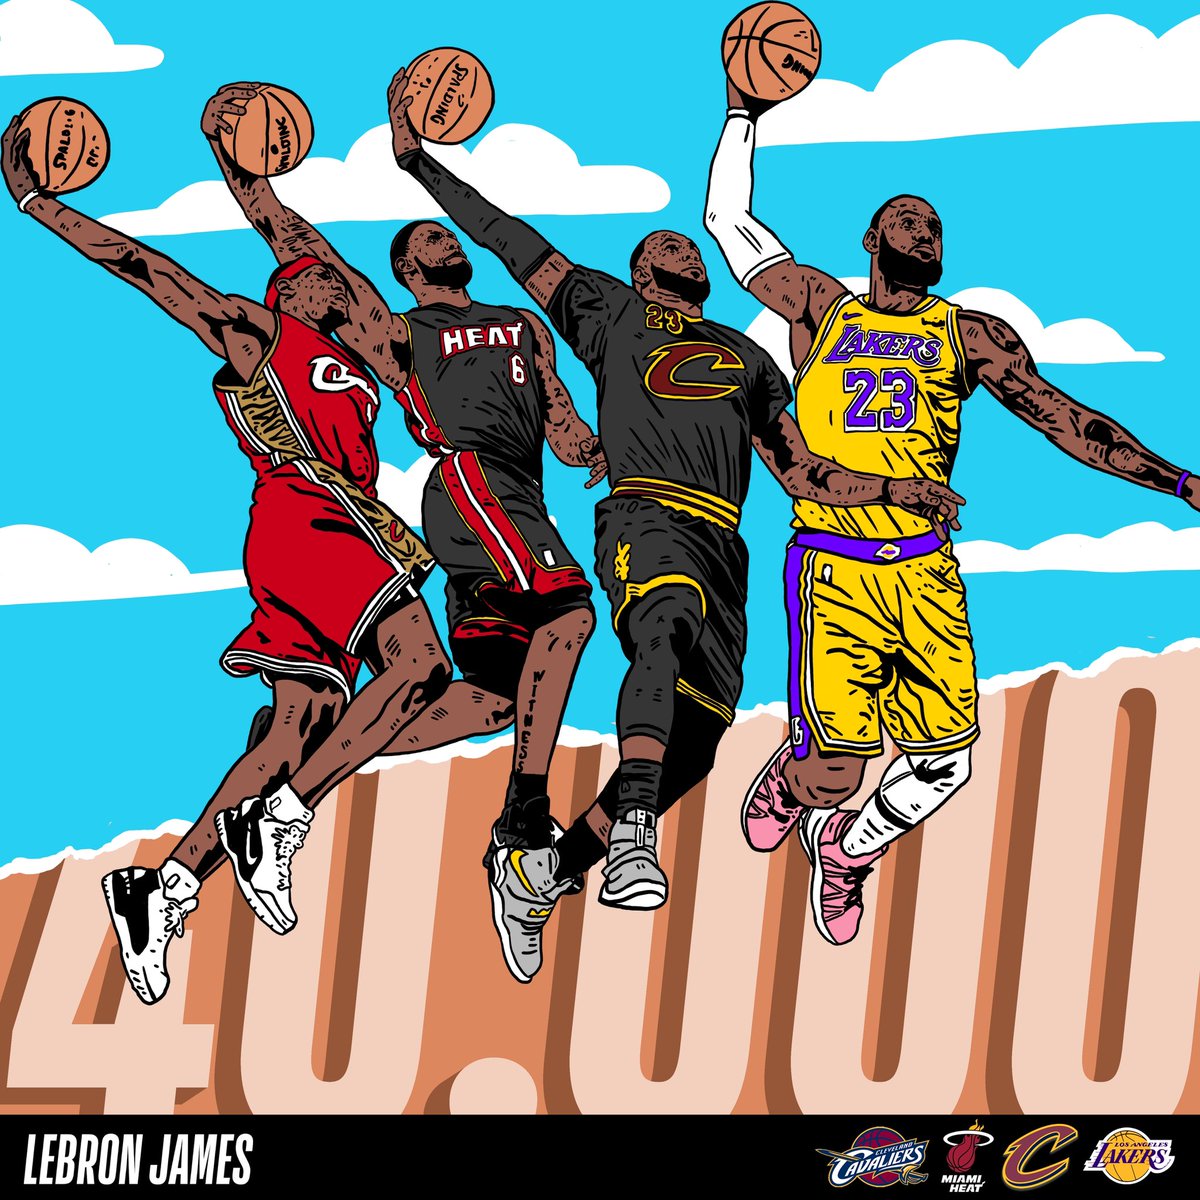 Rare Air… The only NBA player to reach this unbelievable goal… never in my lifetime did I think I’d see someone crack 40,000 points.. Congrats @KingJames on this mind blowing achievement… #lebron #lebronjames #lbj #record #lalakers #laker #cavs #heat #nba #nike #witness